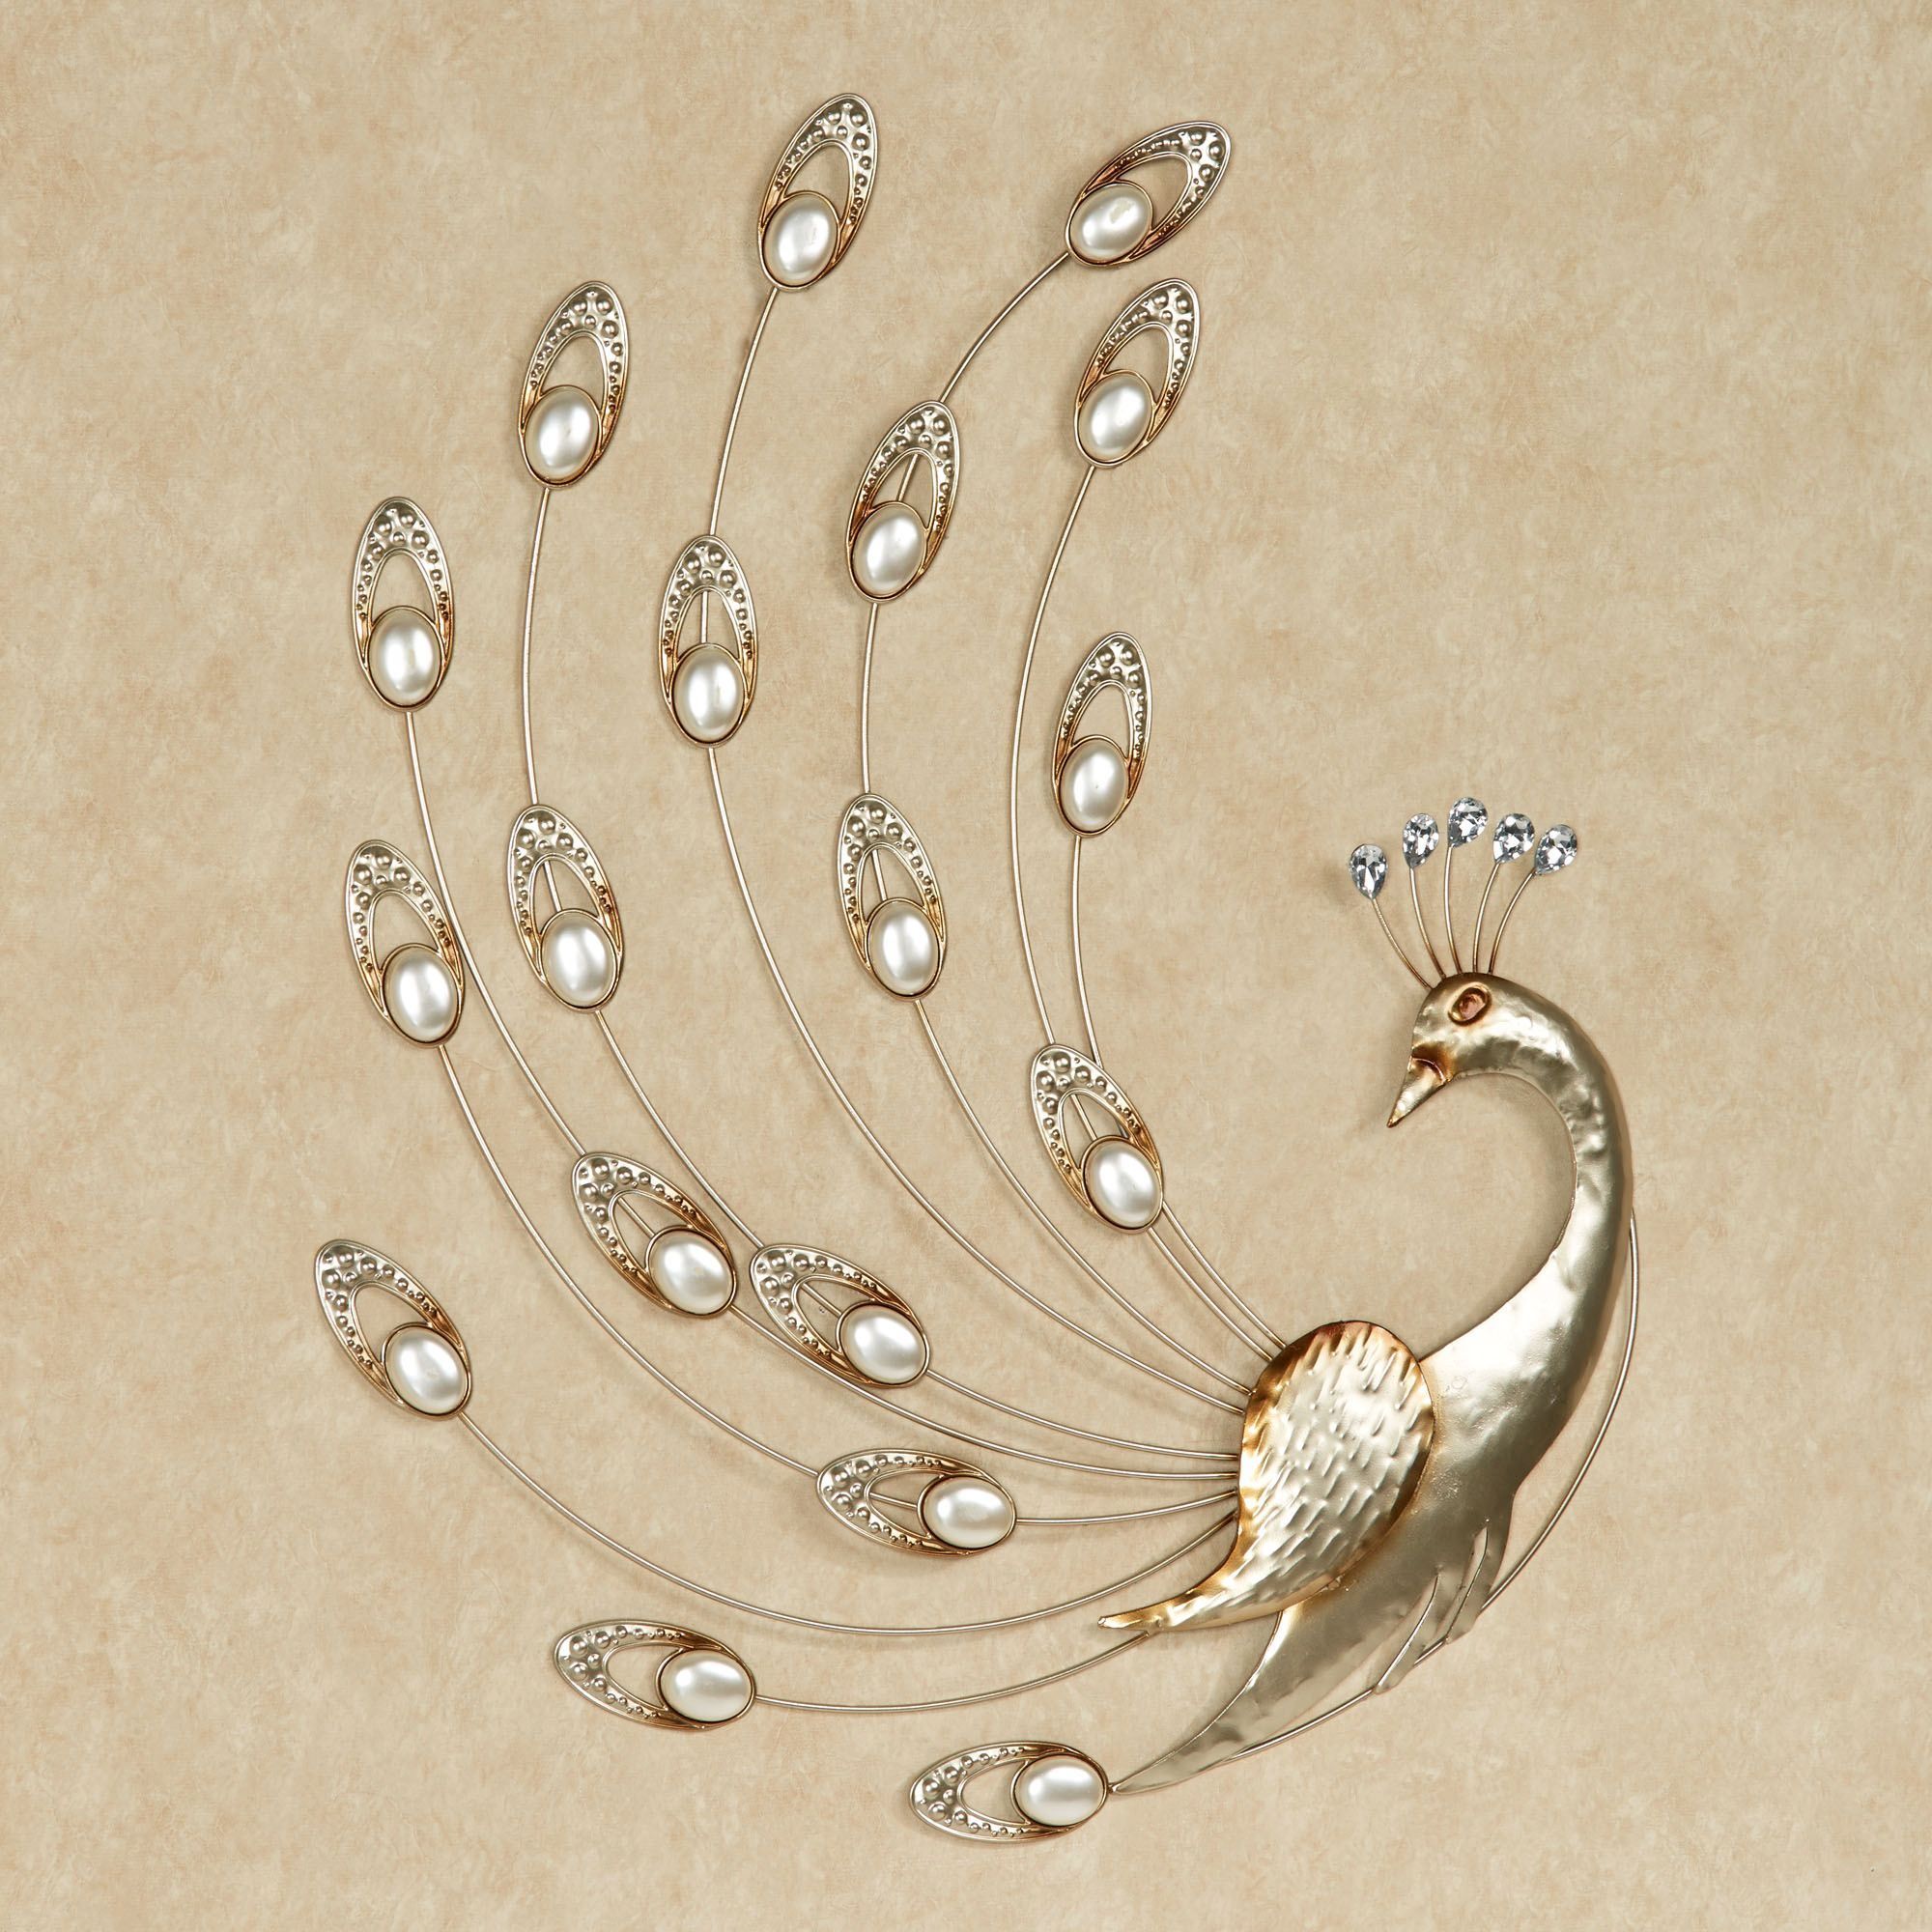 Julietta Pearl Peacock Metal Wall Art With Gold And White Metal Wall Art (View 8 of 15)